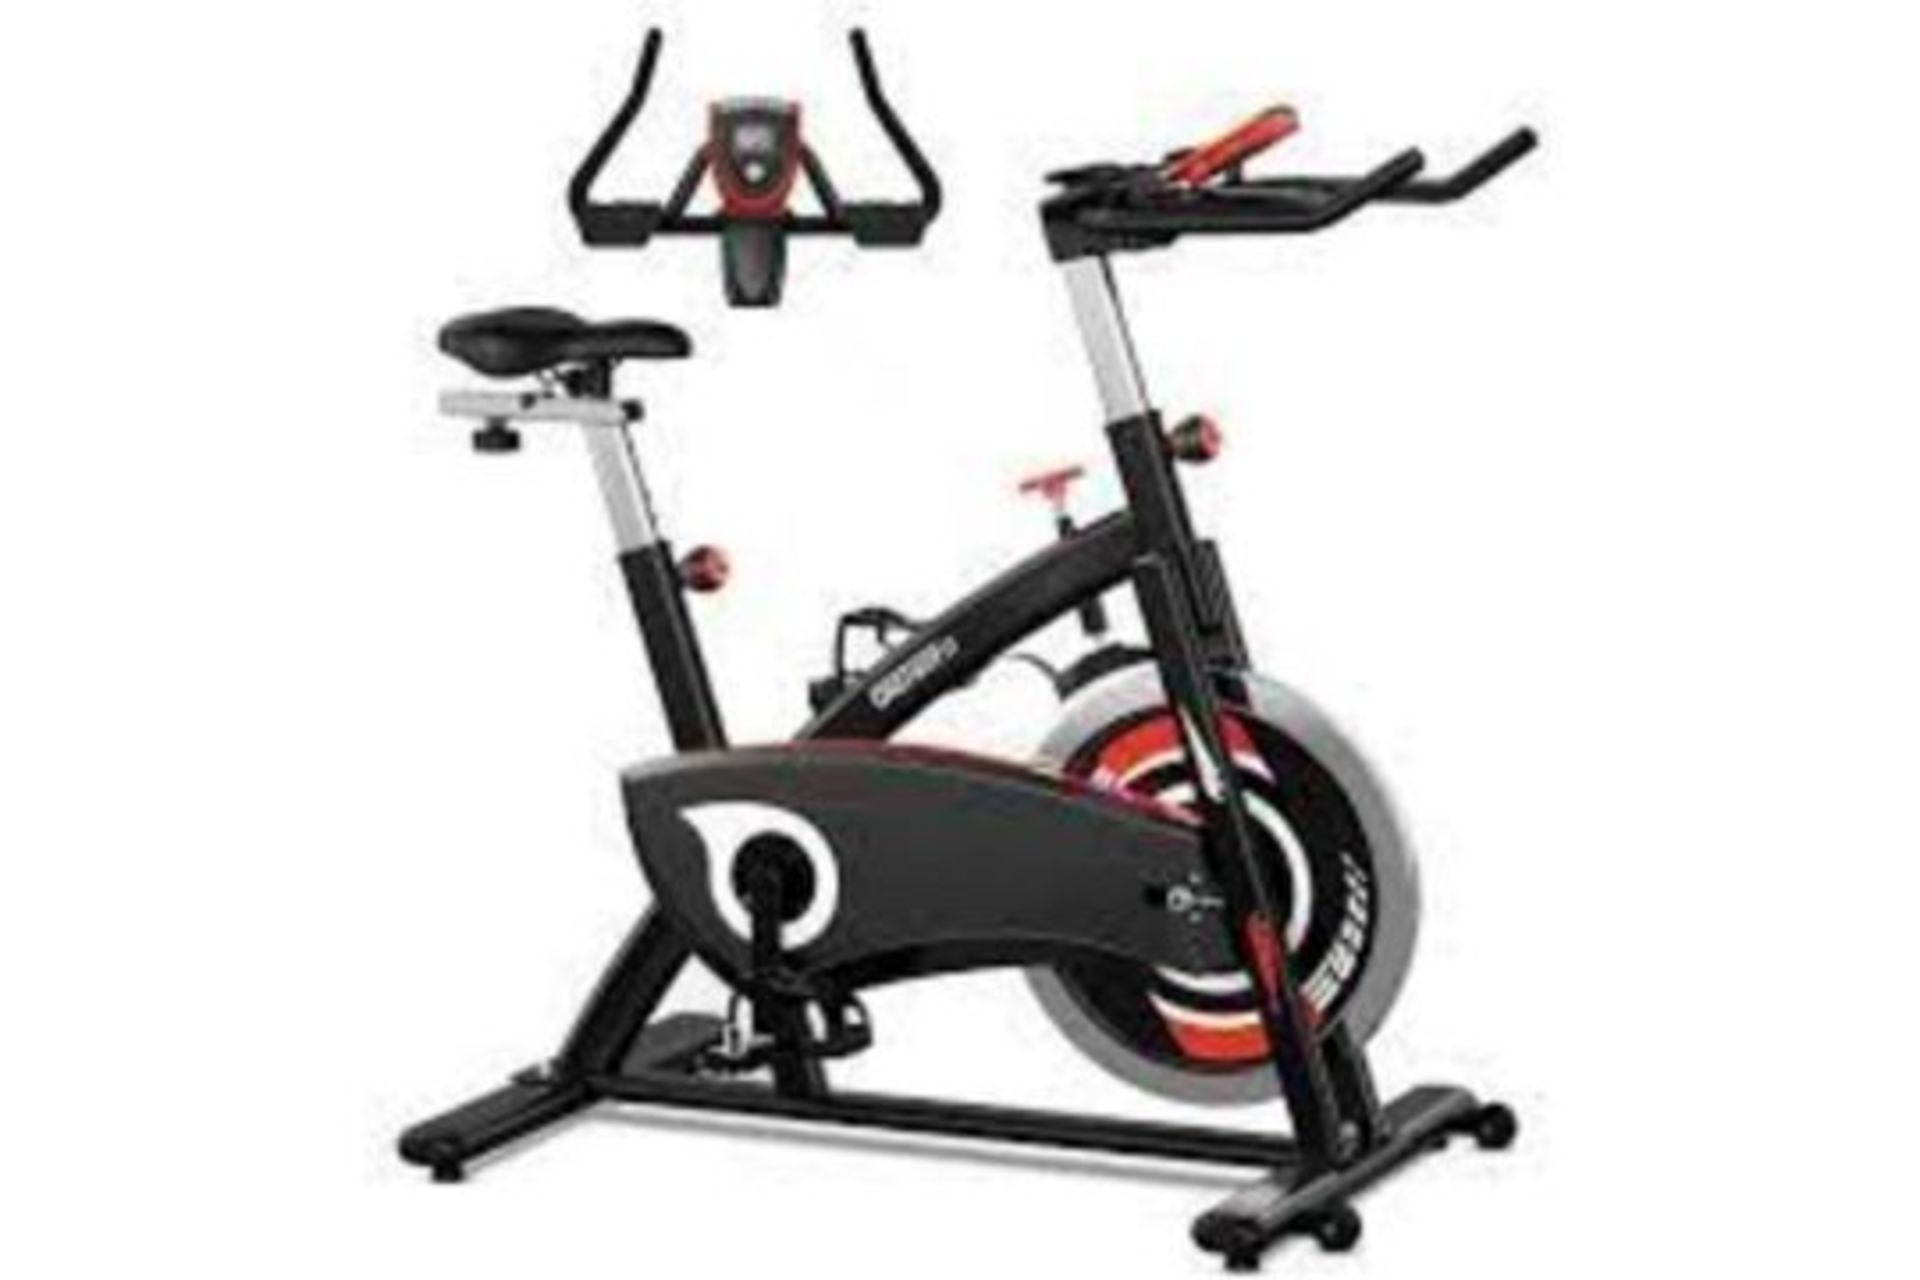 BRAND NEW ONETWOFIT EXERCISE BIKE, INDOOR CYCLING BIKE WITH 44LBS FLYWHEEL, SILENT BELT DRIVE, - Image 2 of 2